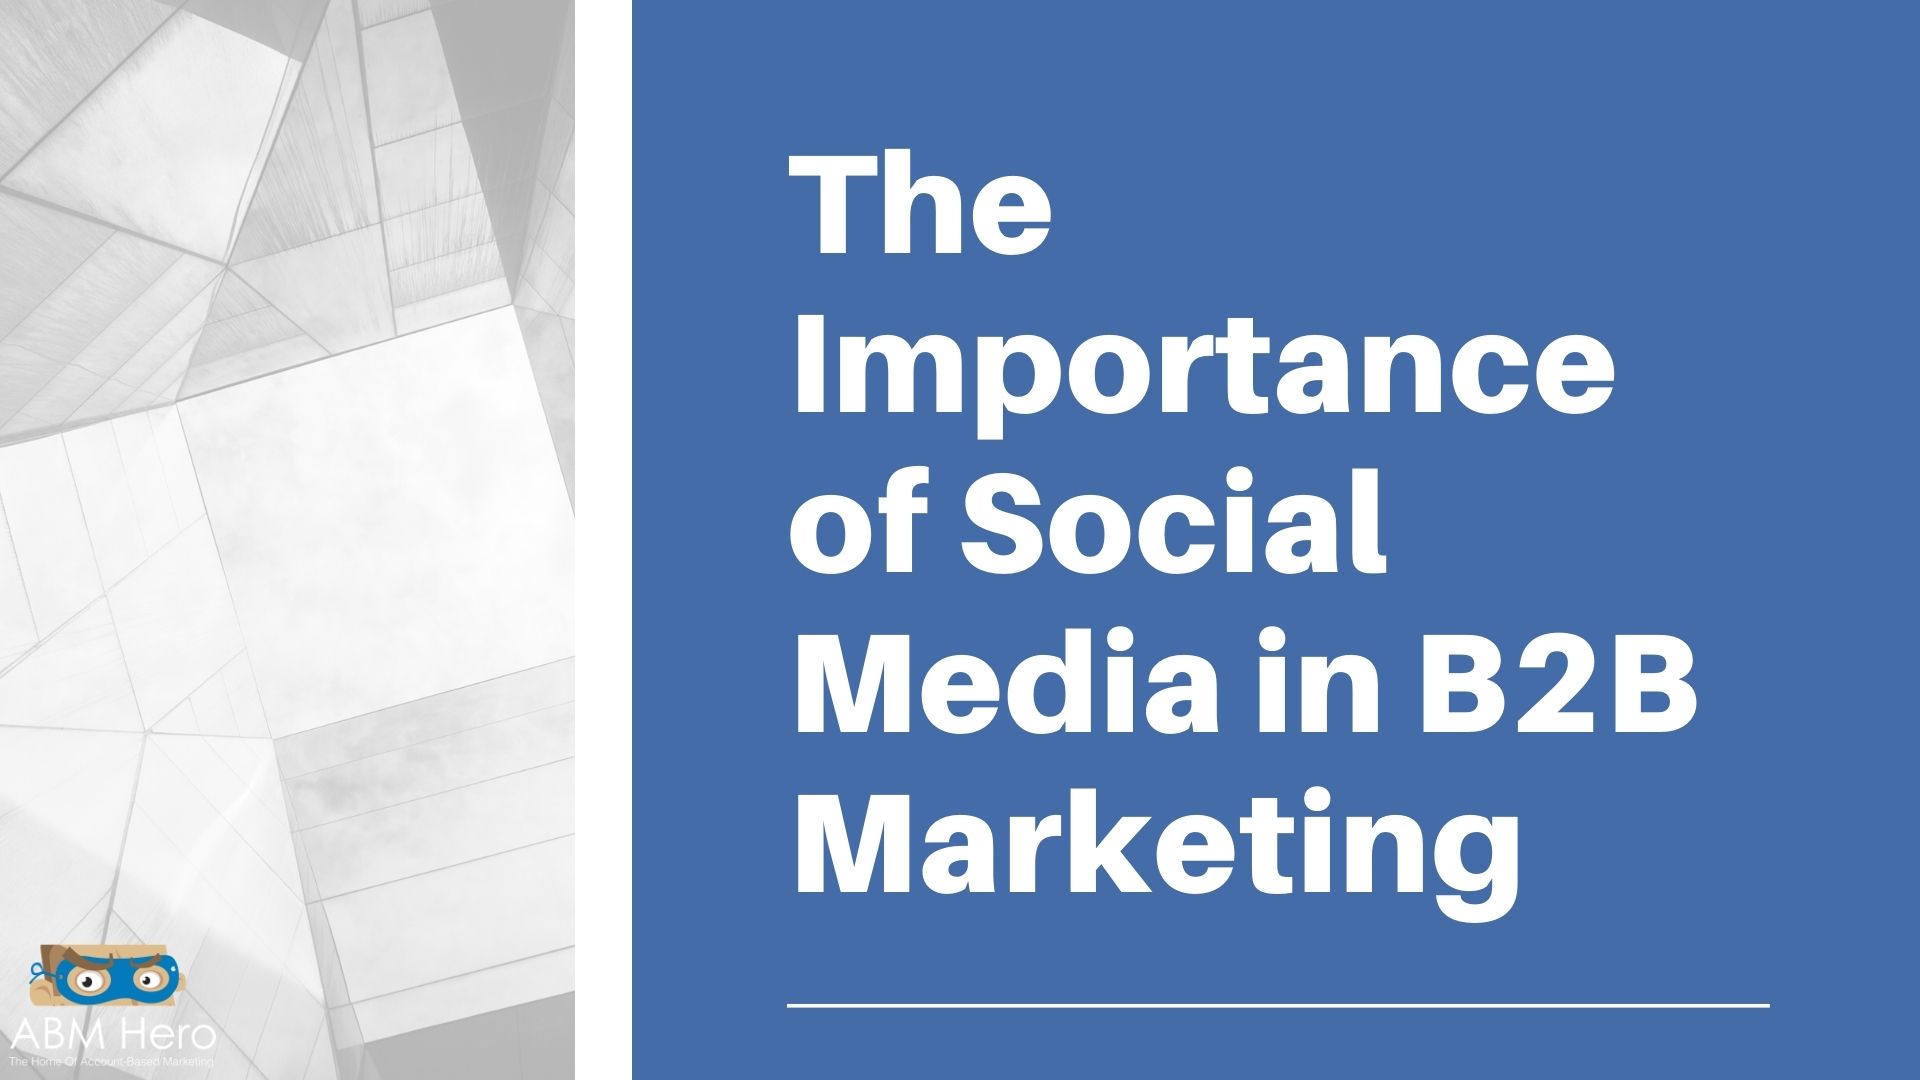 You are currently viewing The Importance of Social Media in B2B Marketing